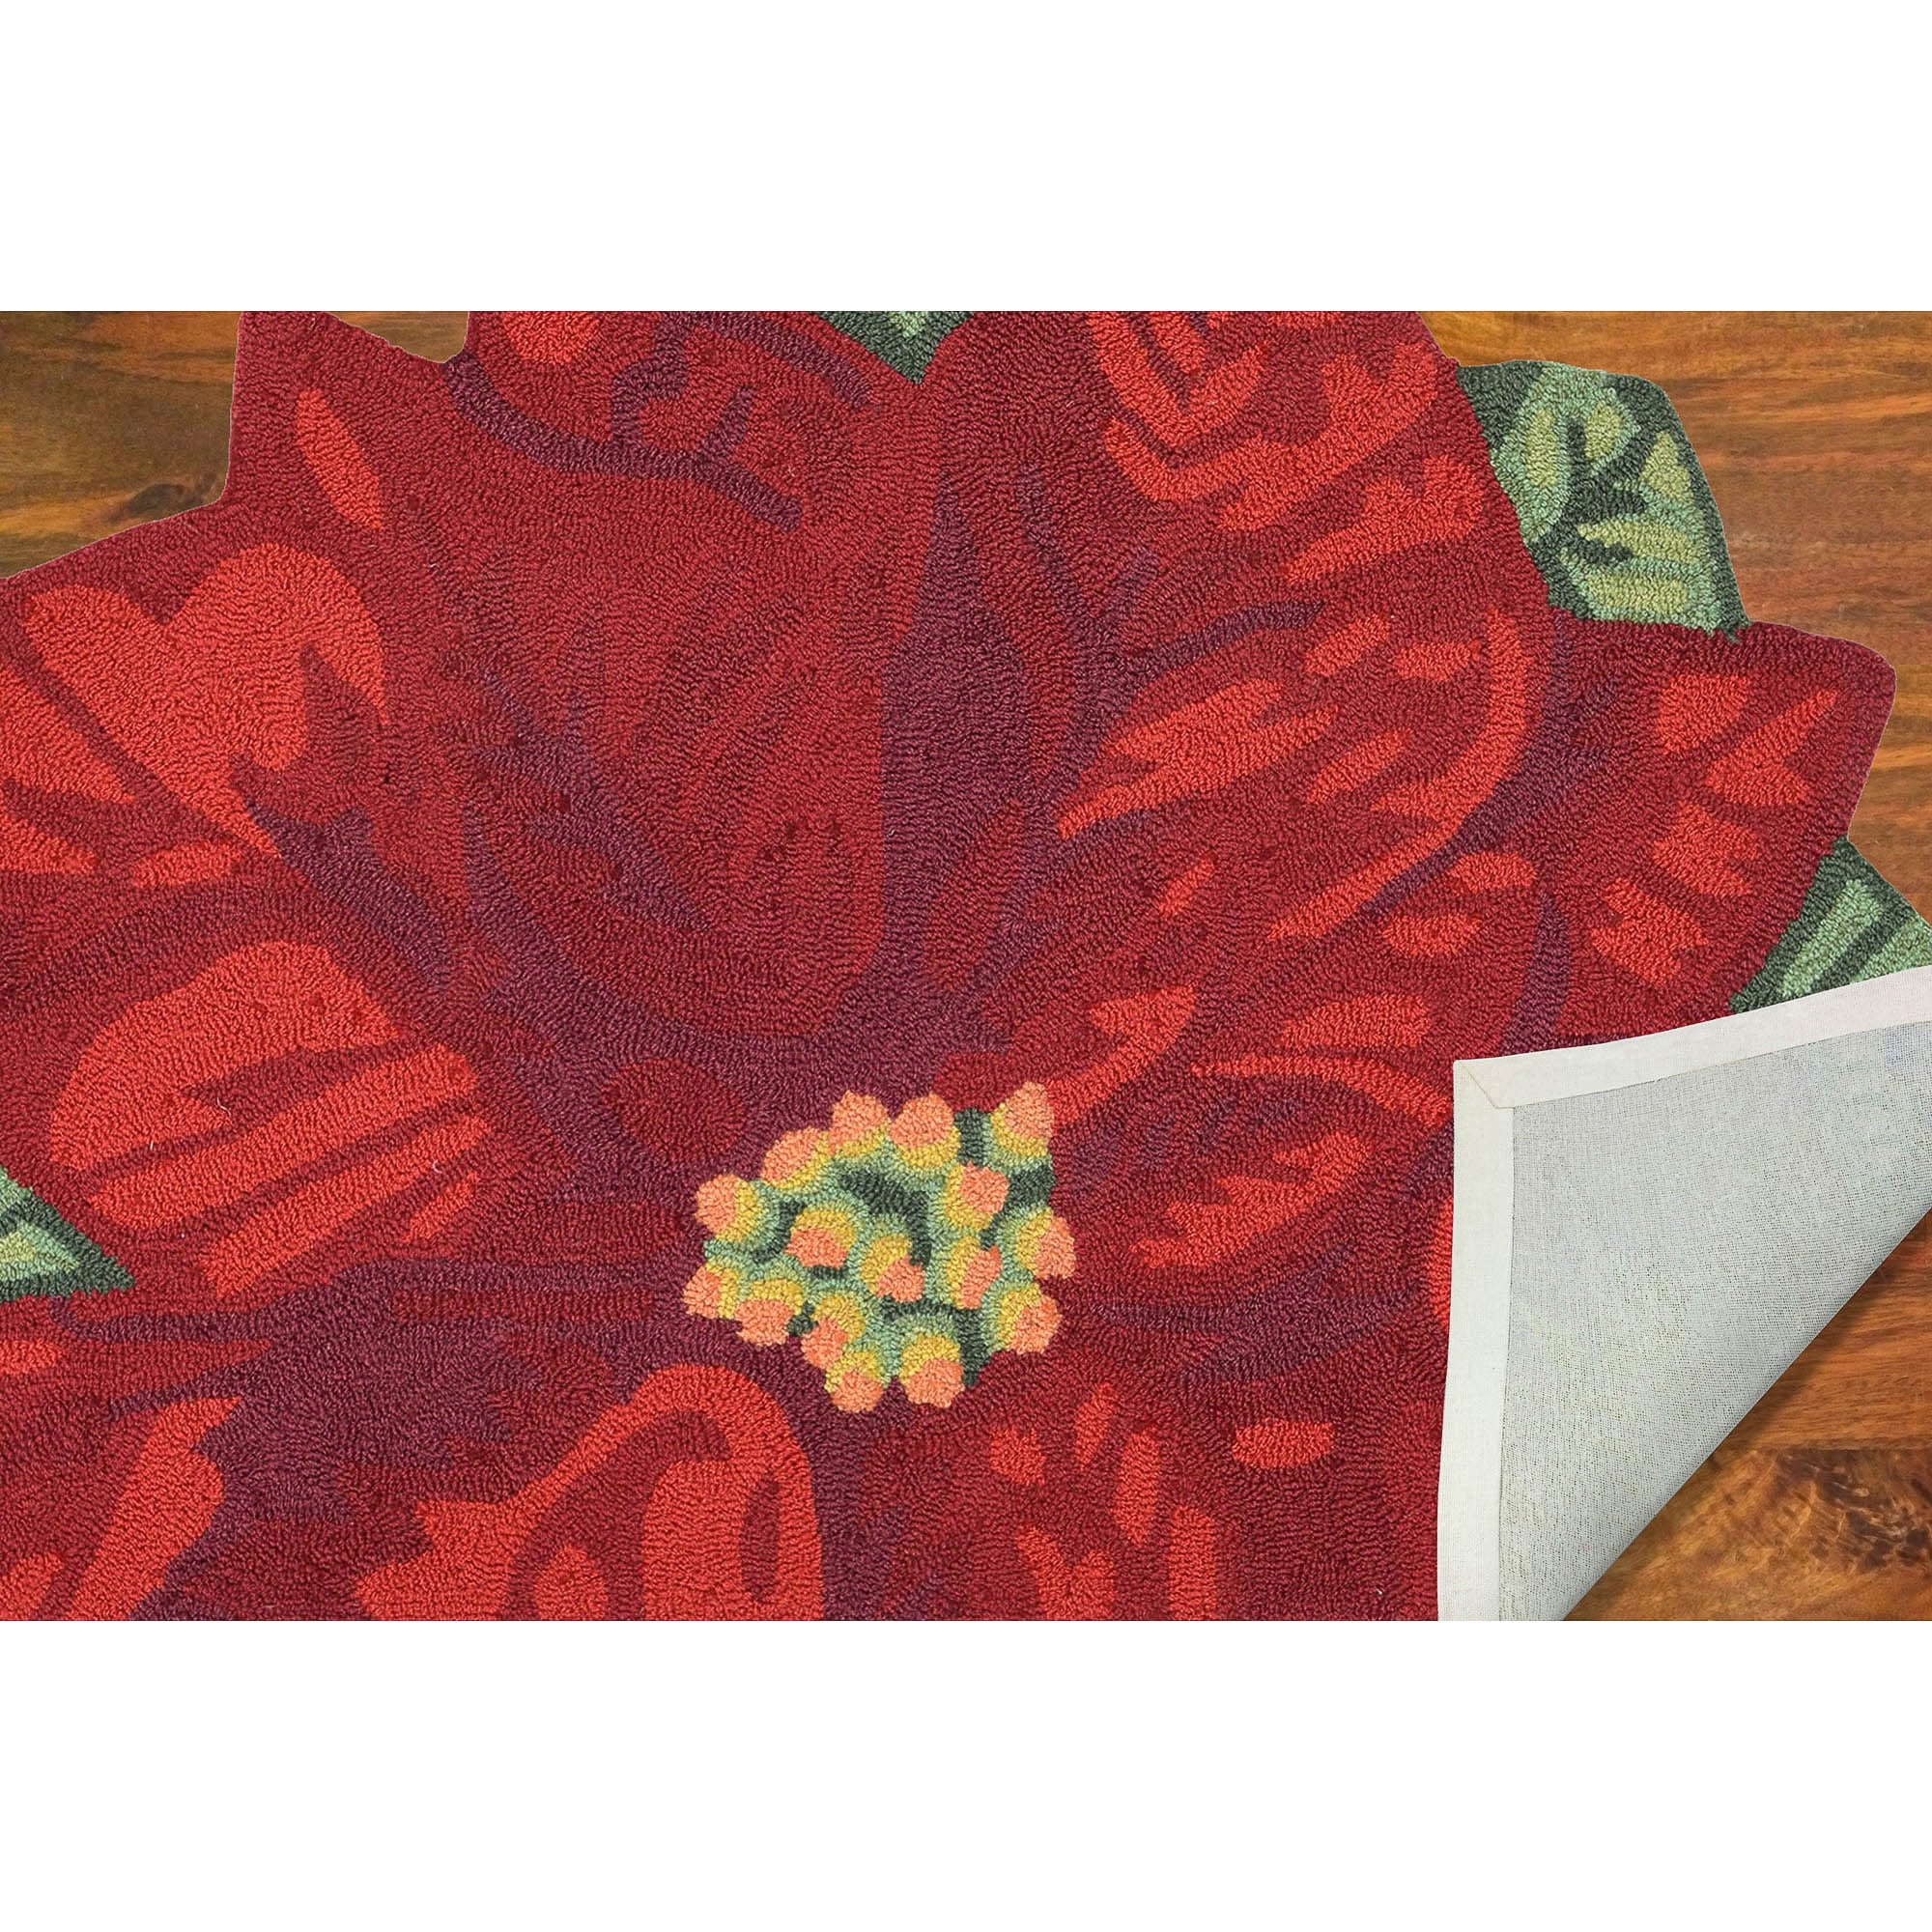 https://ak1.ostkcdn.com/images/products/is/images/direct/75edc5c5cf333f0536e039fc28397443abe4ca93/Liora-Manne-Frontporch-Poinsettia-In-Out-Rug-Red-20%22x30%22-1-2-Round.jpg